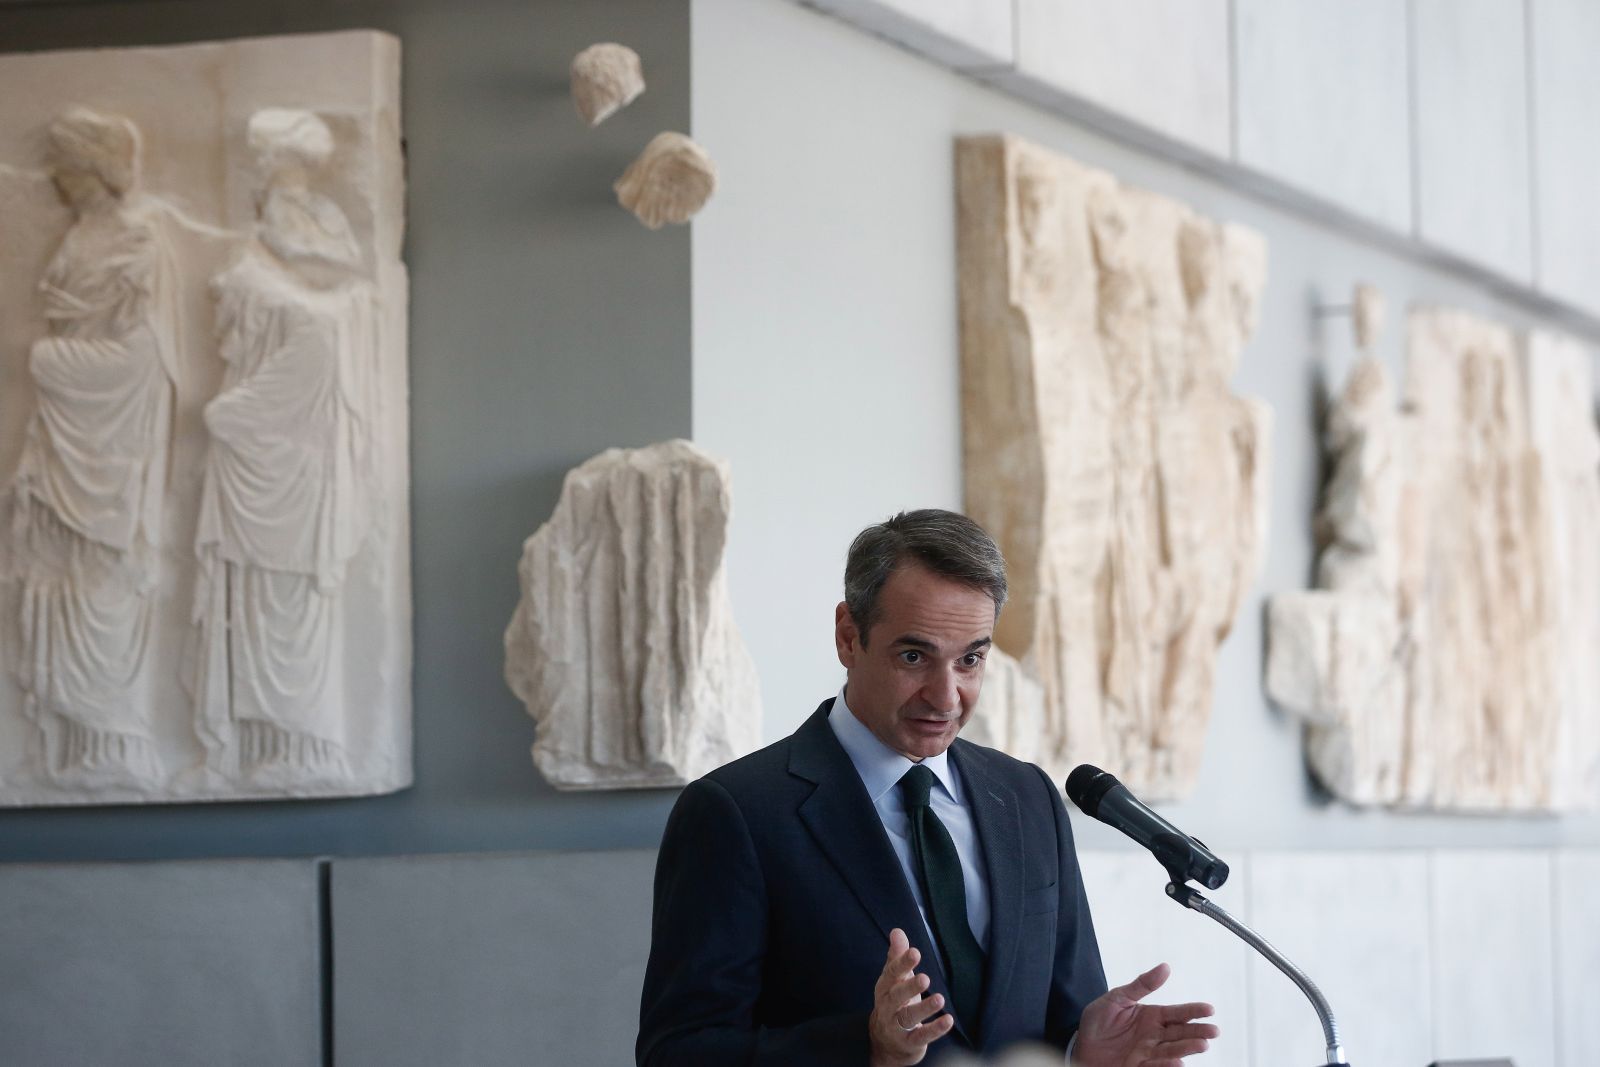 epa09664679 Greek Prime Minister Kyriakos Mitsotakis delivers a speech during a ceremony marking the arrival of fragments of the sculptural decoration of the Parthenon at the Acropolis Museum in Athens, Greece, 03 January 2022. Ten fragments of the Parthenon were transferred from the warehouse of the National Archaeological Museum, where they were kept, for display at the Acropolis Museum.  EPA/YANNIS KOLESIDIS